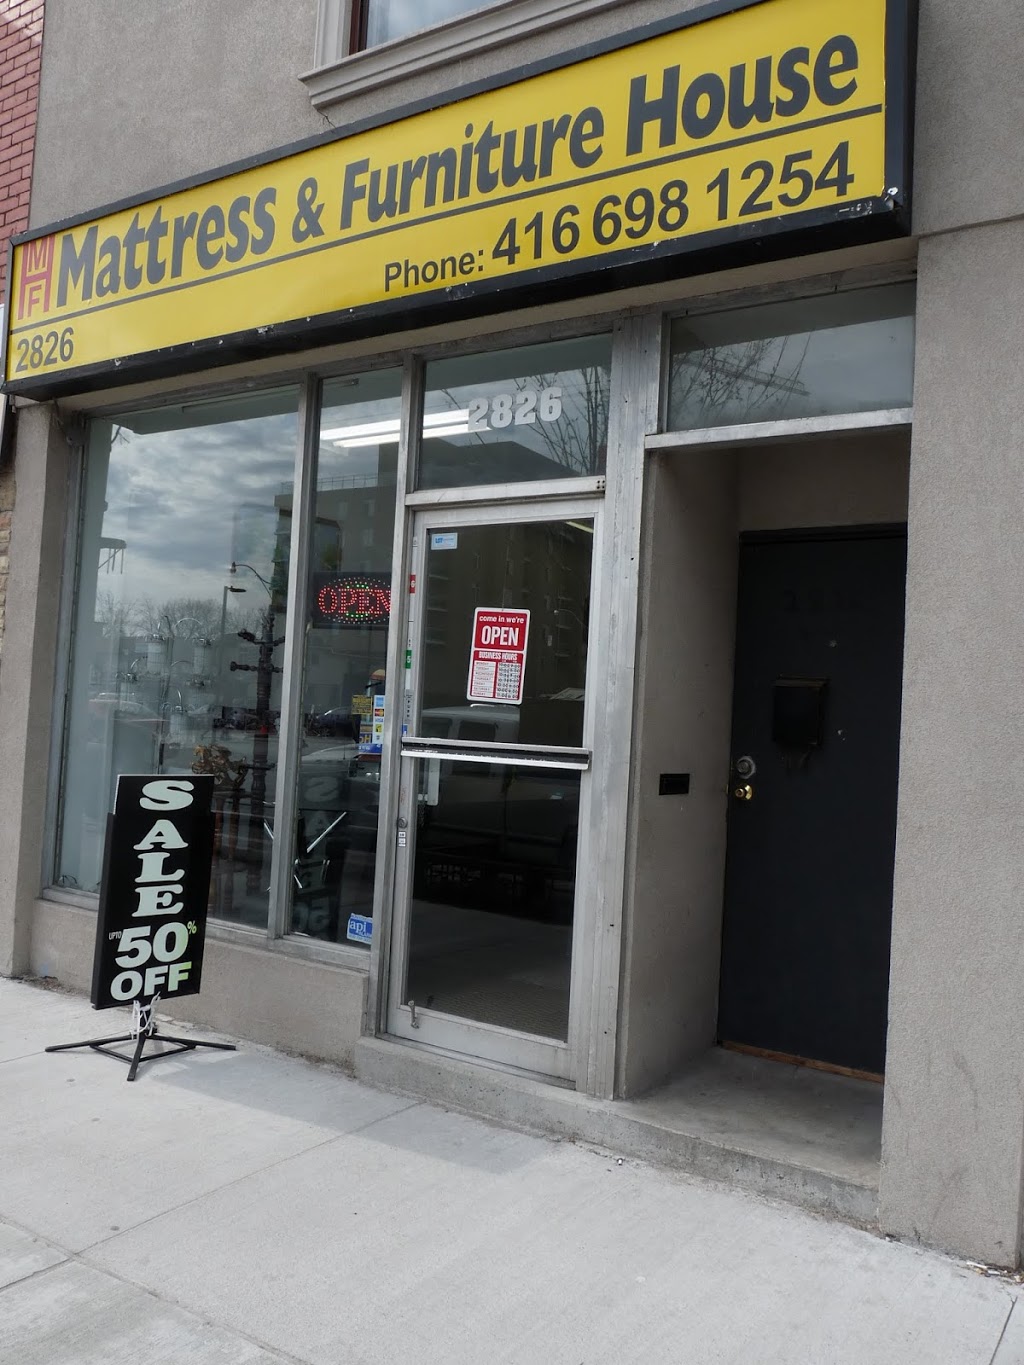 Mattress and Furniture House | 2826 Danforth Ave, Toronto, ON M4C 1M1, Canada | Phone: (416) 698-1254